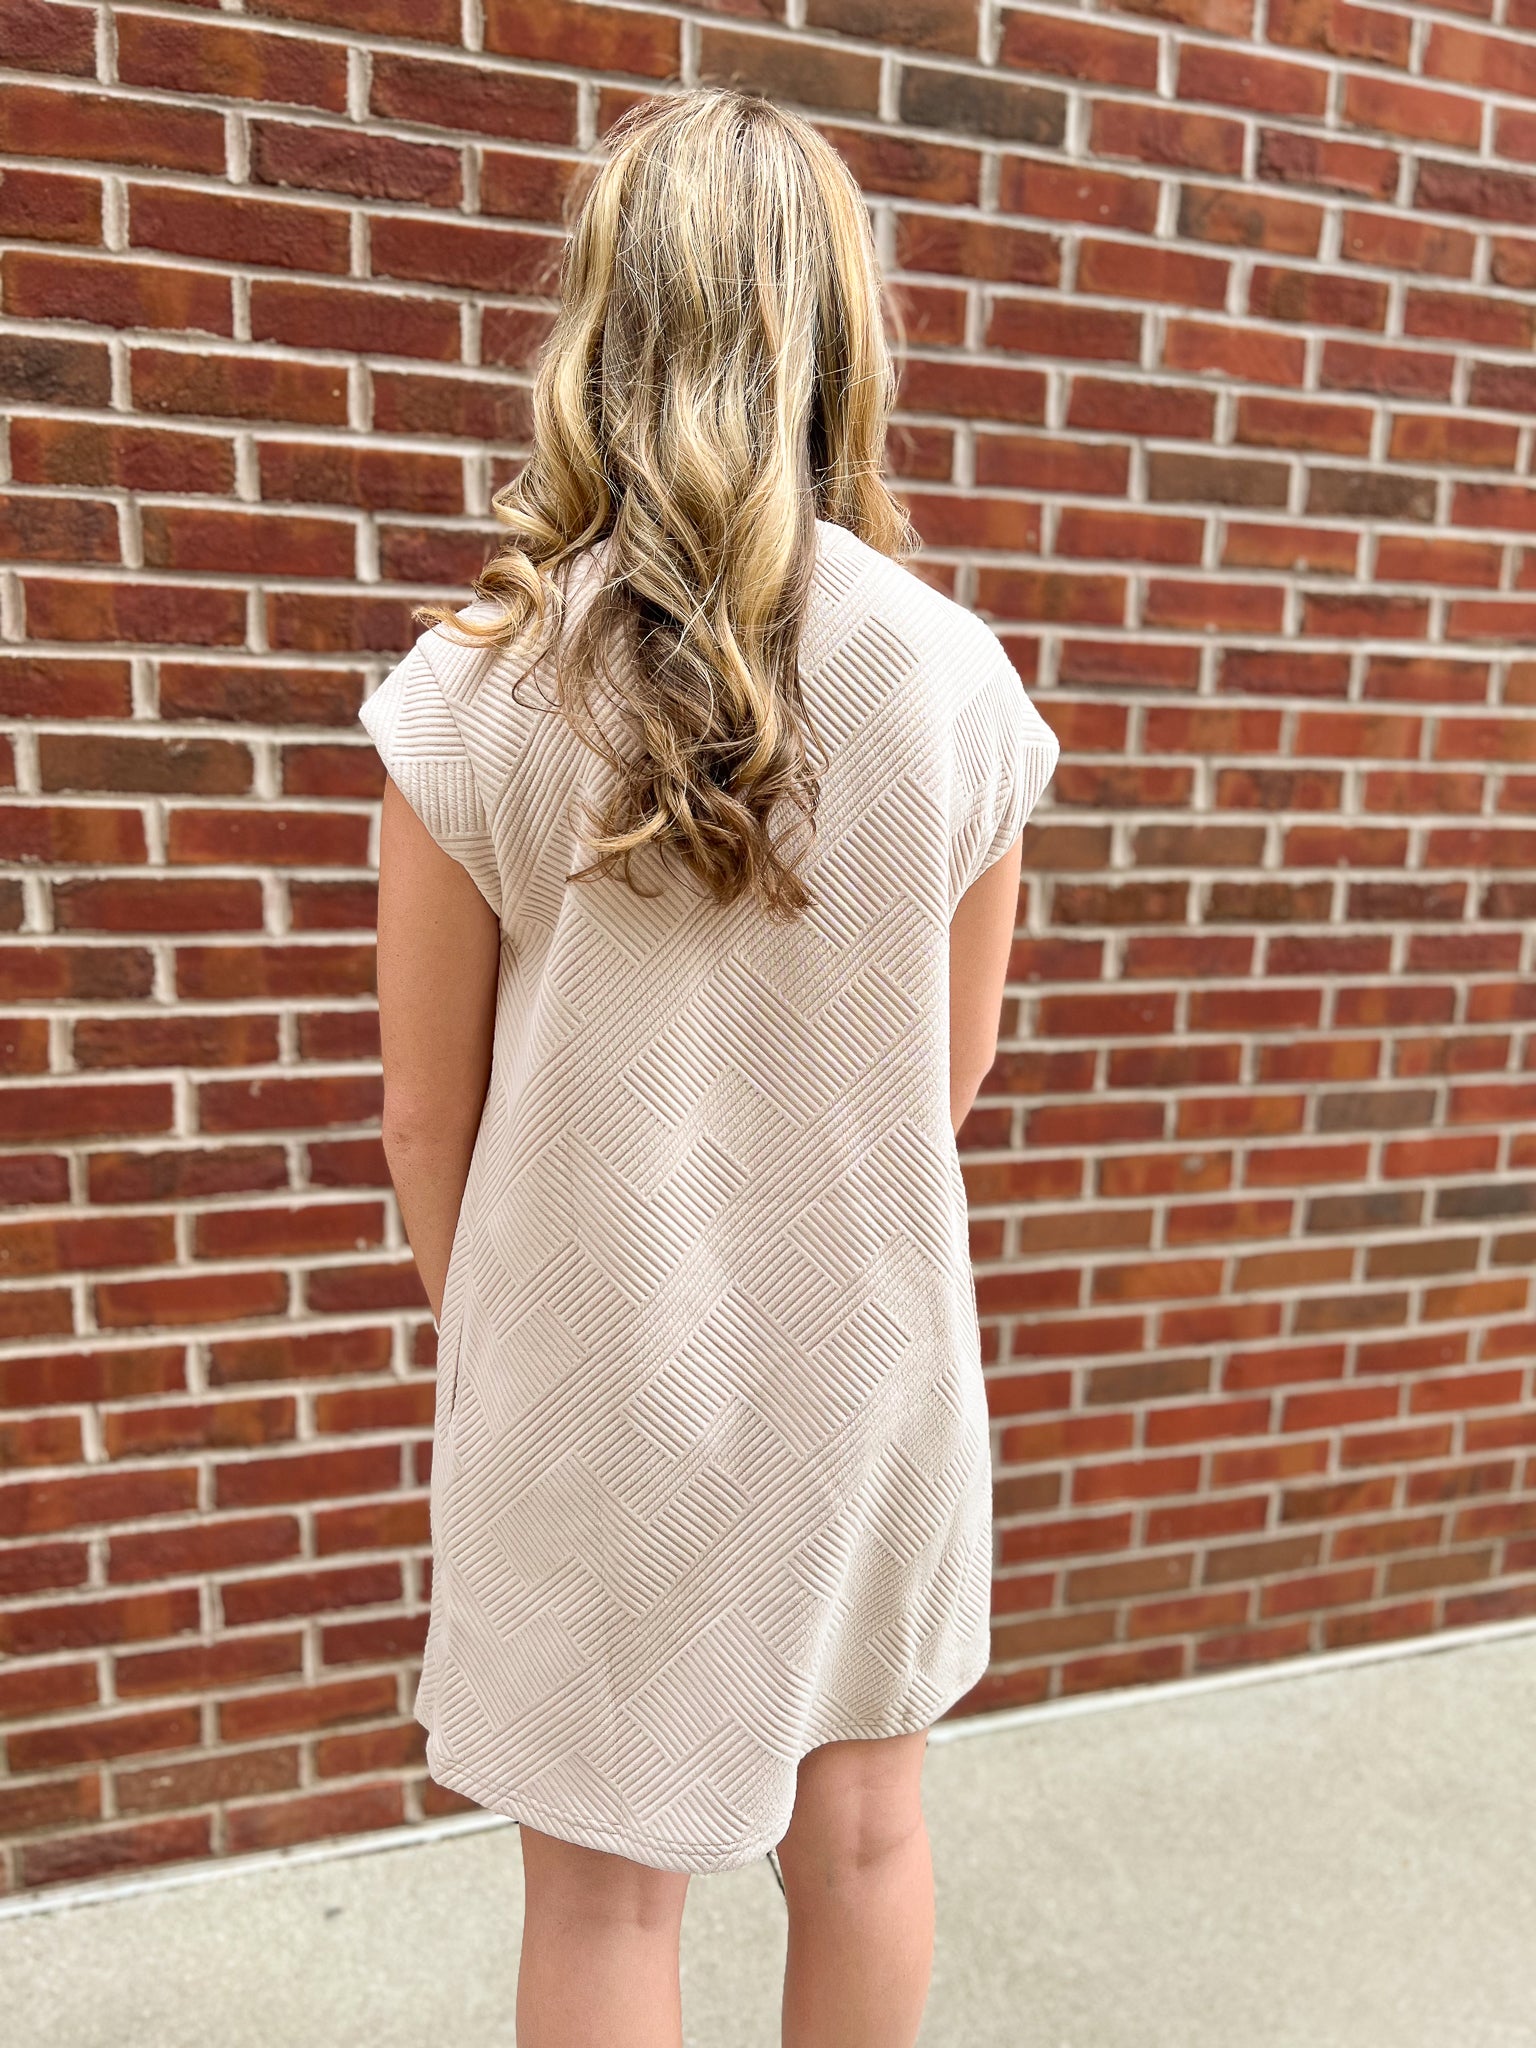 The back view of a tan dress with short sleeves from Daisy Mercantile.